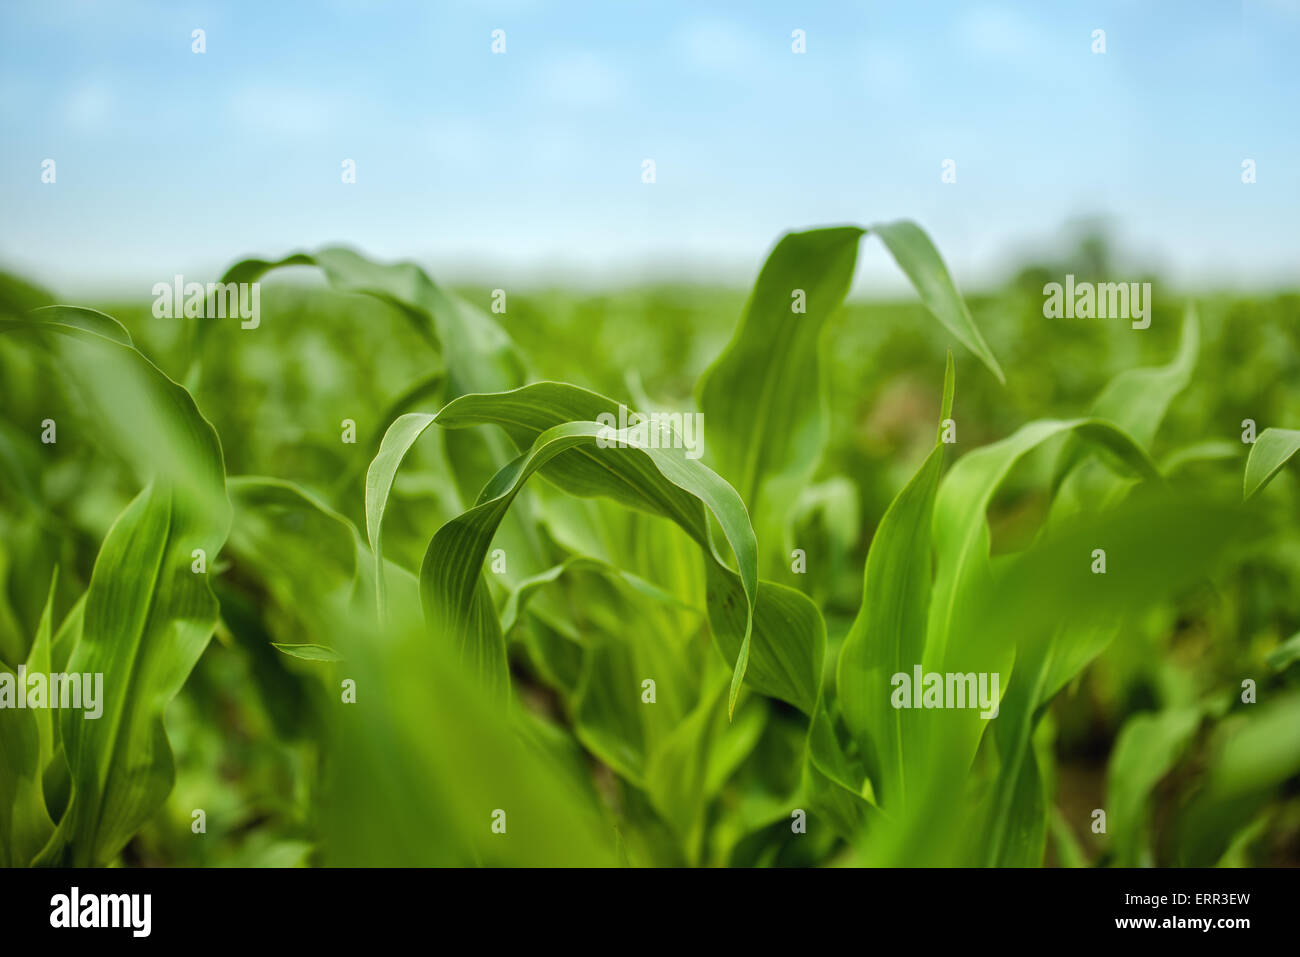 Young Maize Corn Crops Leaves in Field, Green Plants in Cultivated Plantation, Selective Focus Stock Photo